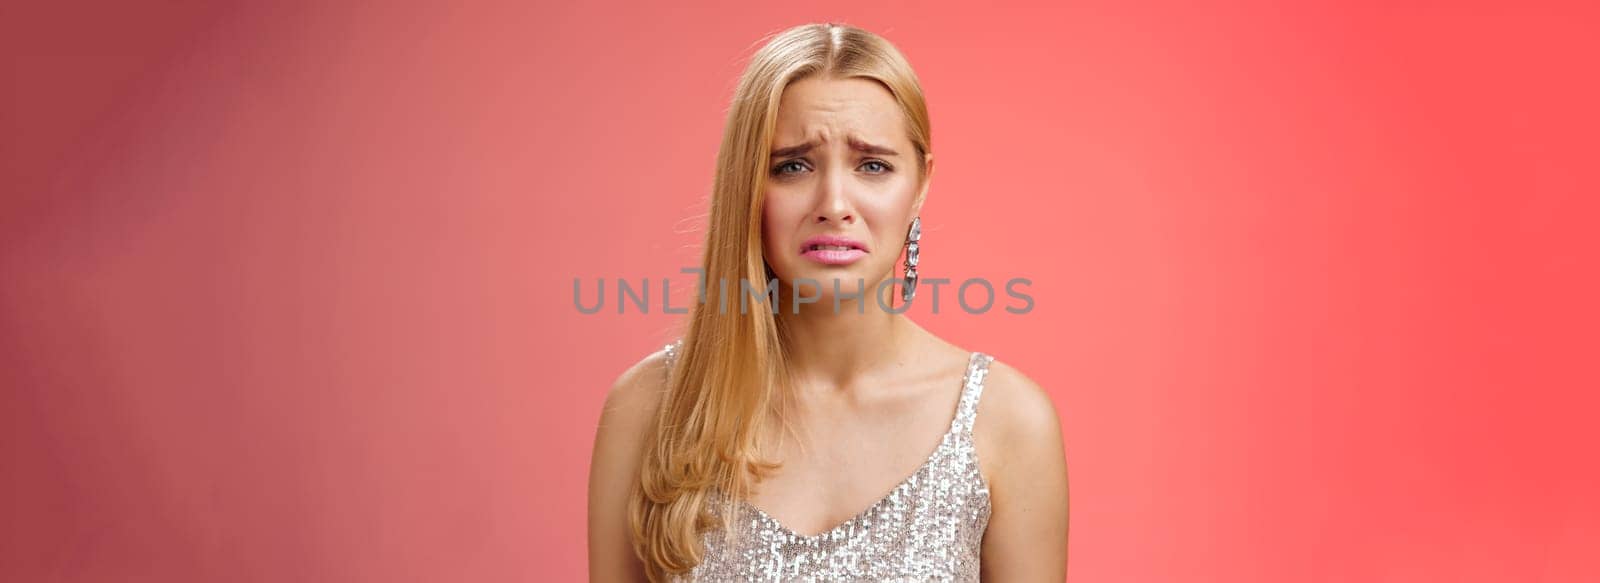 Disappointed complaining cute blond woman in silver stylish dress grimacing frowning upset have bad day pouting pity standing displeased unhappy heartbroken everything bad, red background.